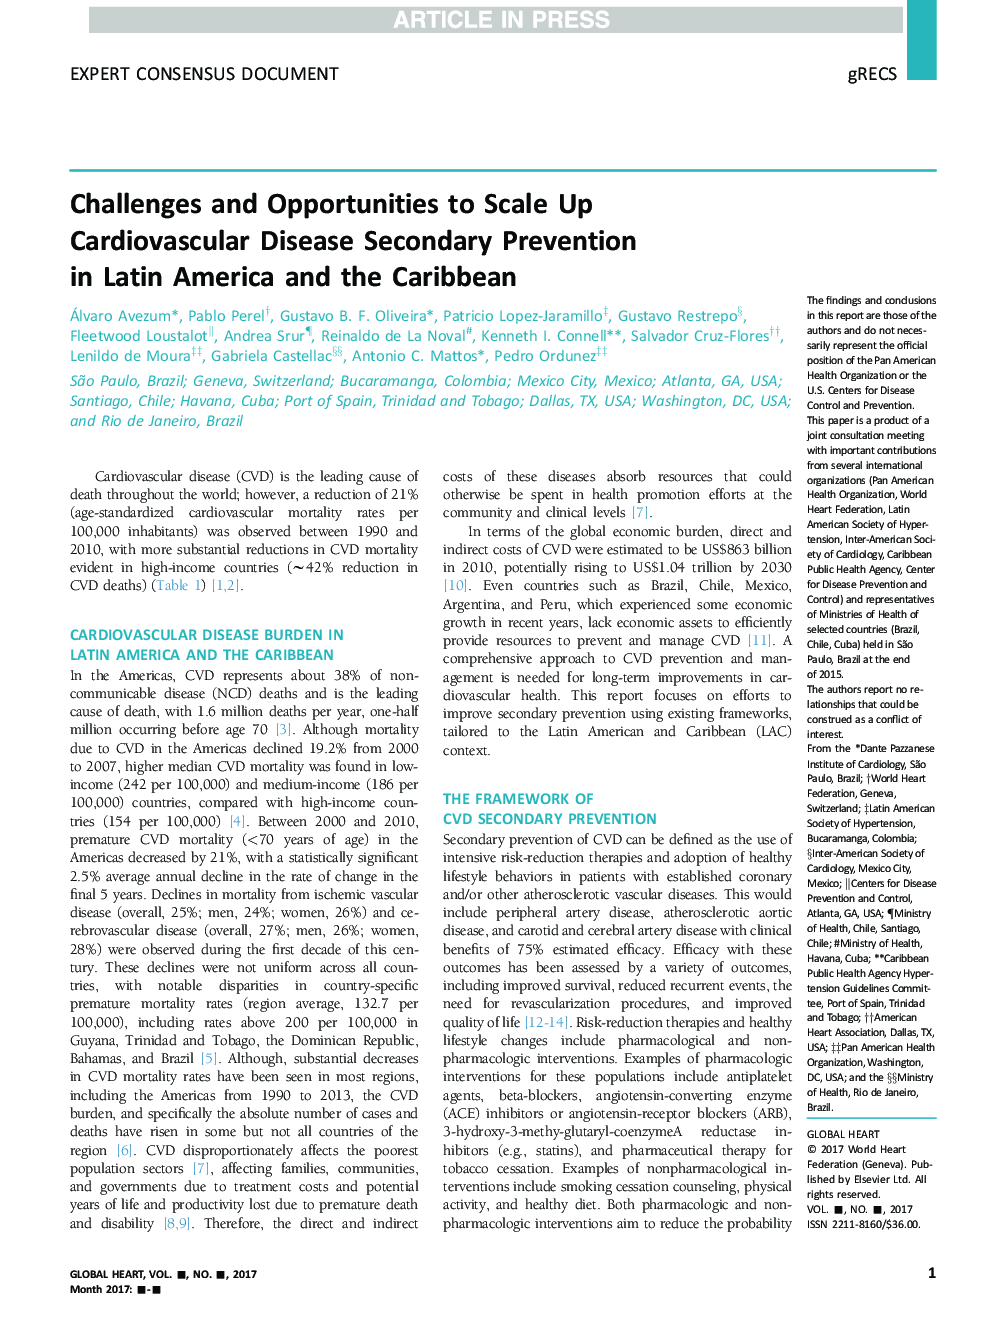 Challenges and Opportunities to Scale Up Cardiovascular Disease Secondary Prevention in Latin America and the Caribbean